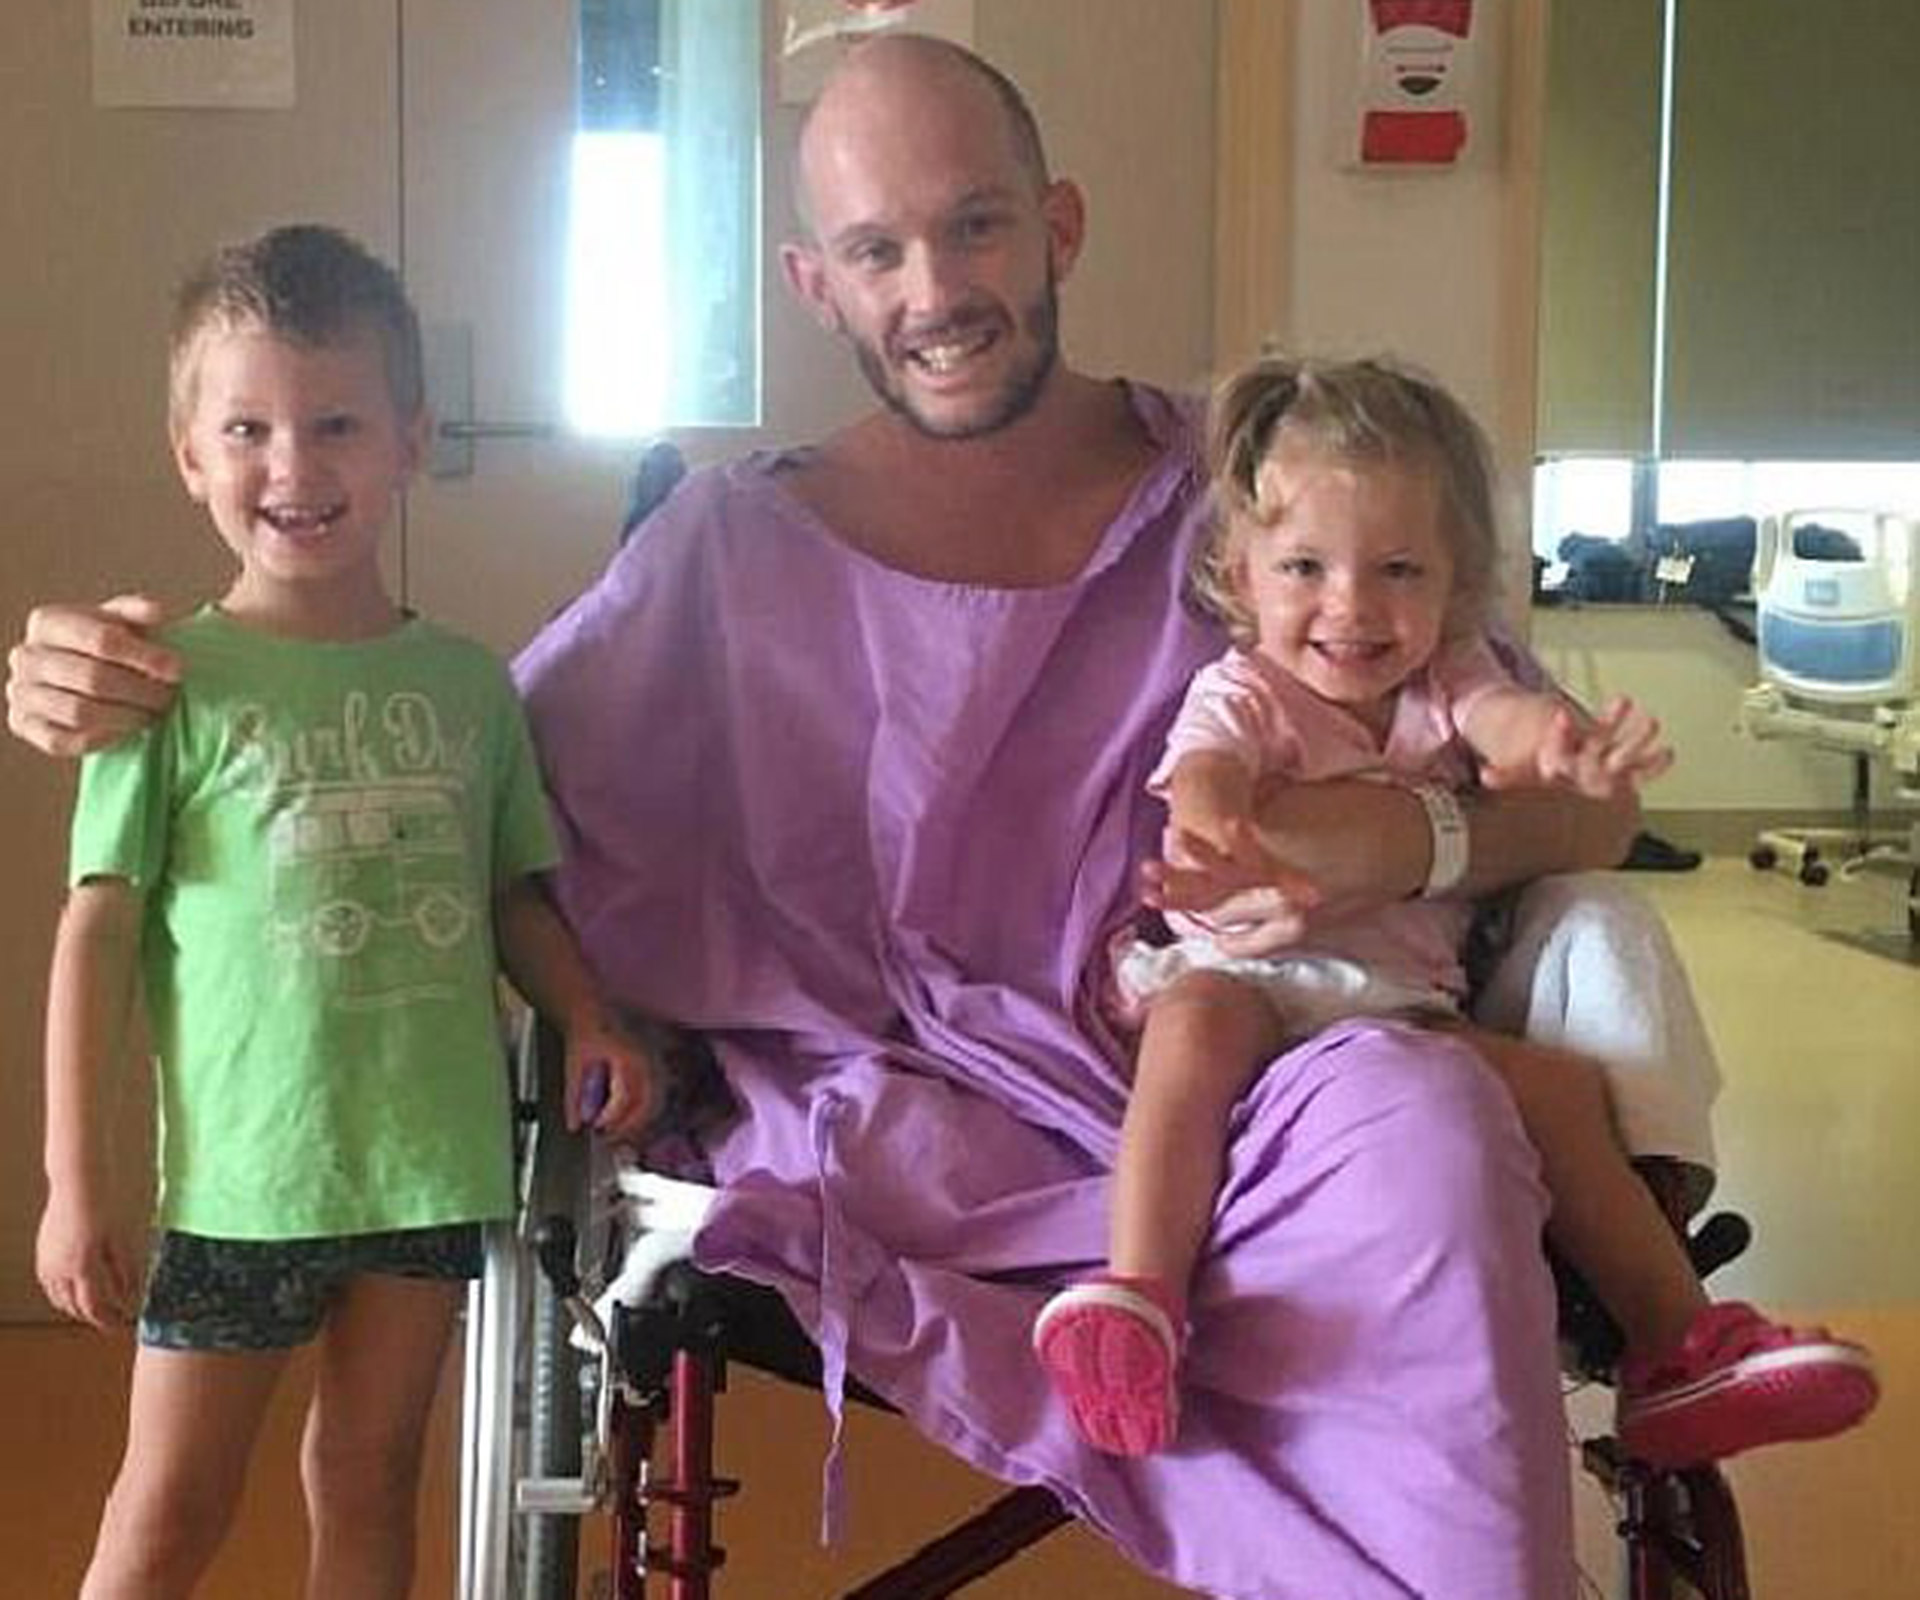 Qld shark attack victim recounts horrific moment he was mauled and almost killed